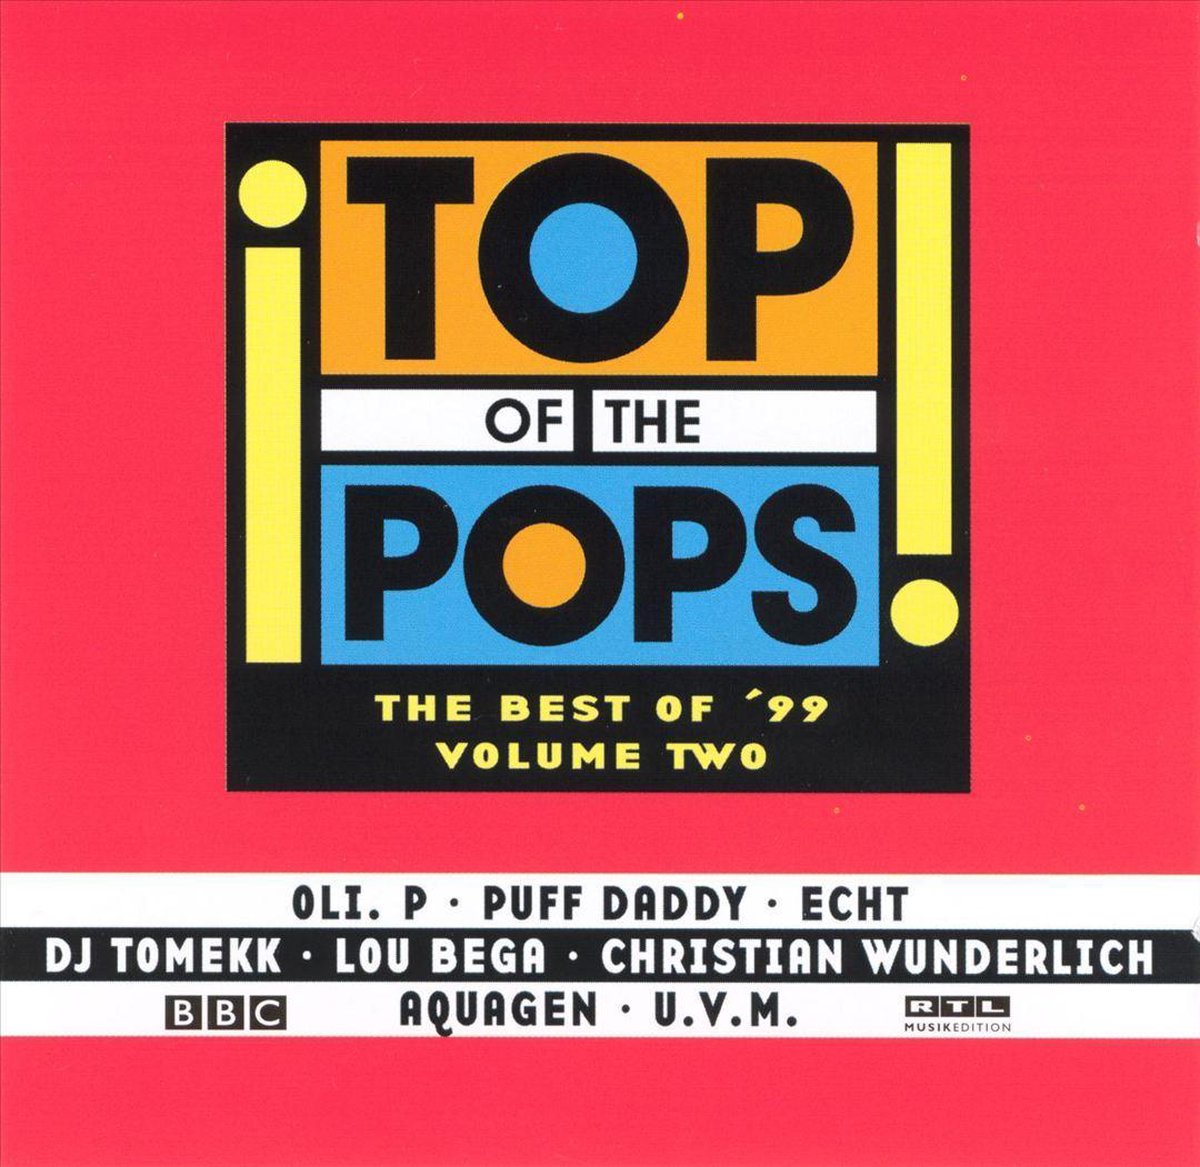 Top of the Pops 1999, Vol. 2 [BMG] - various artists